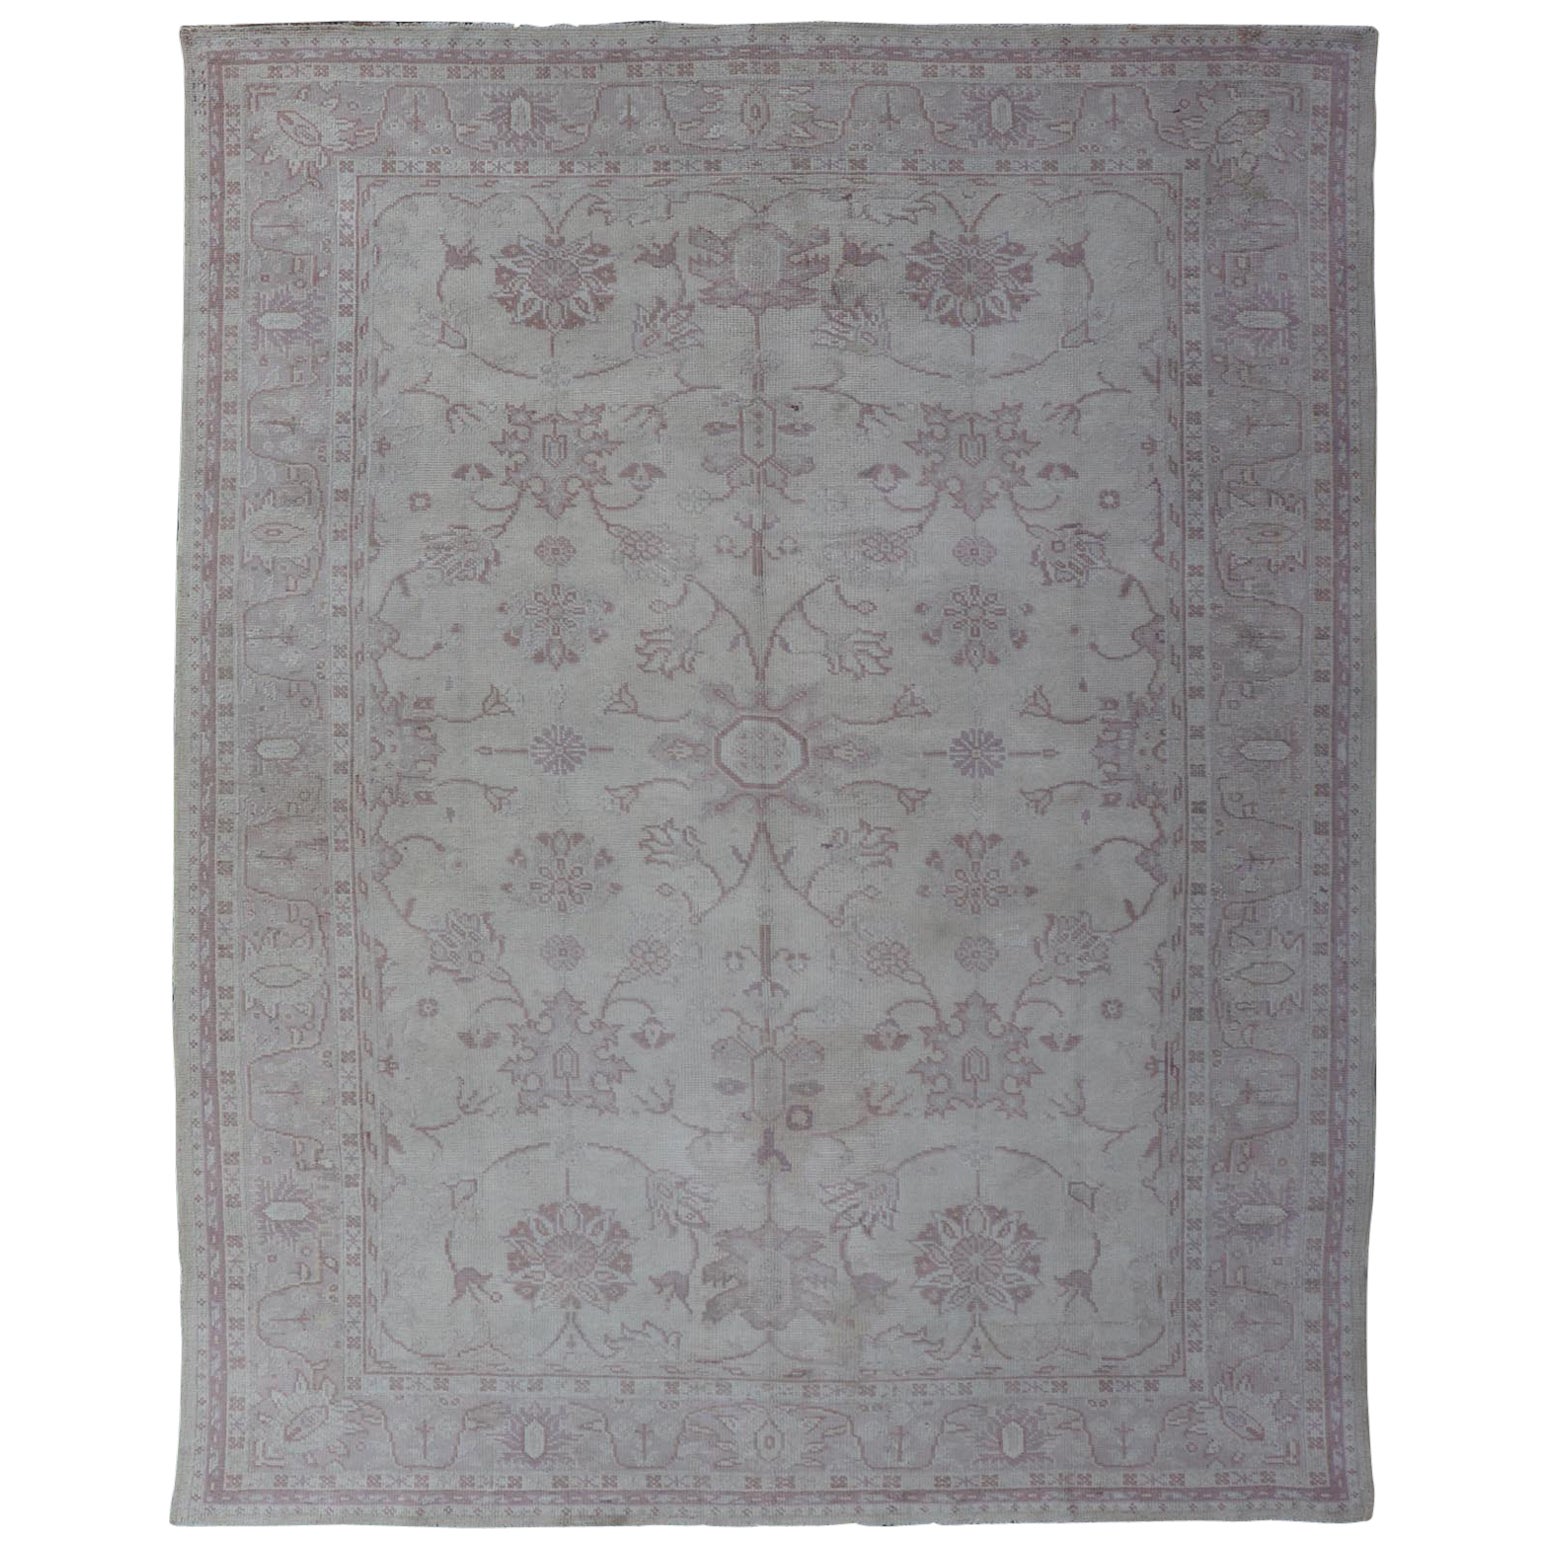 Antique Turkish Oushak Rug with Floral Patterns in Cream and Neutral Colors  For Sale